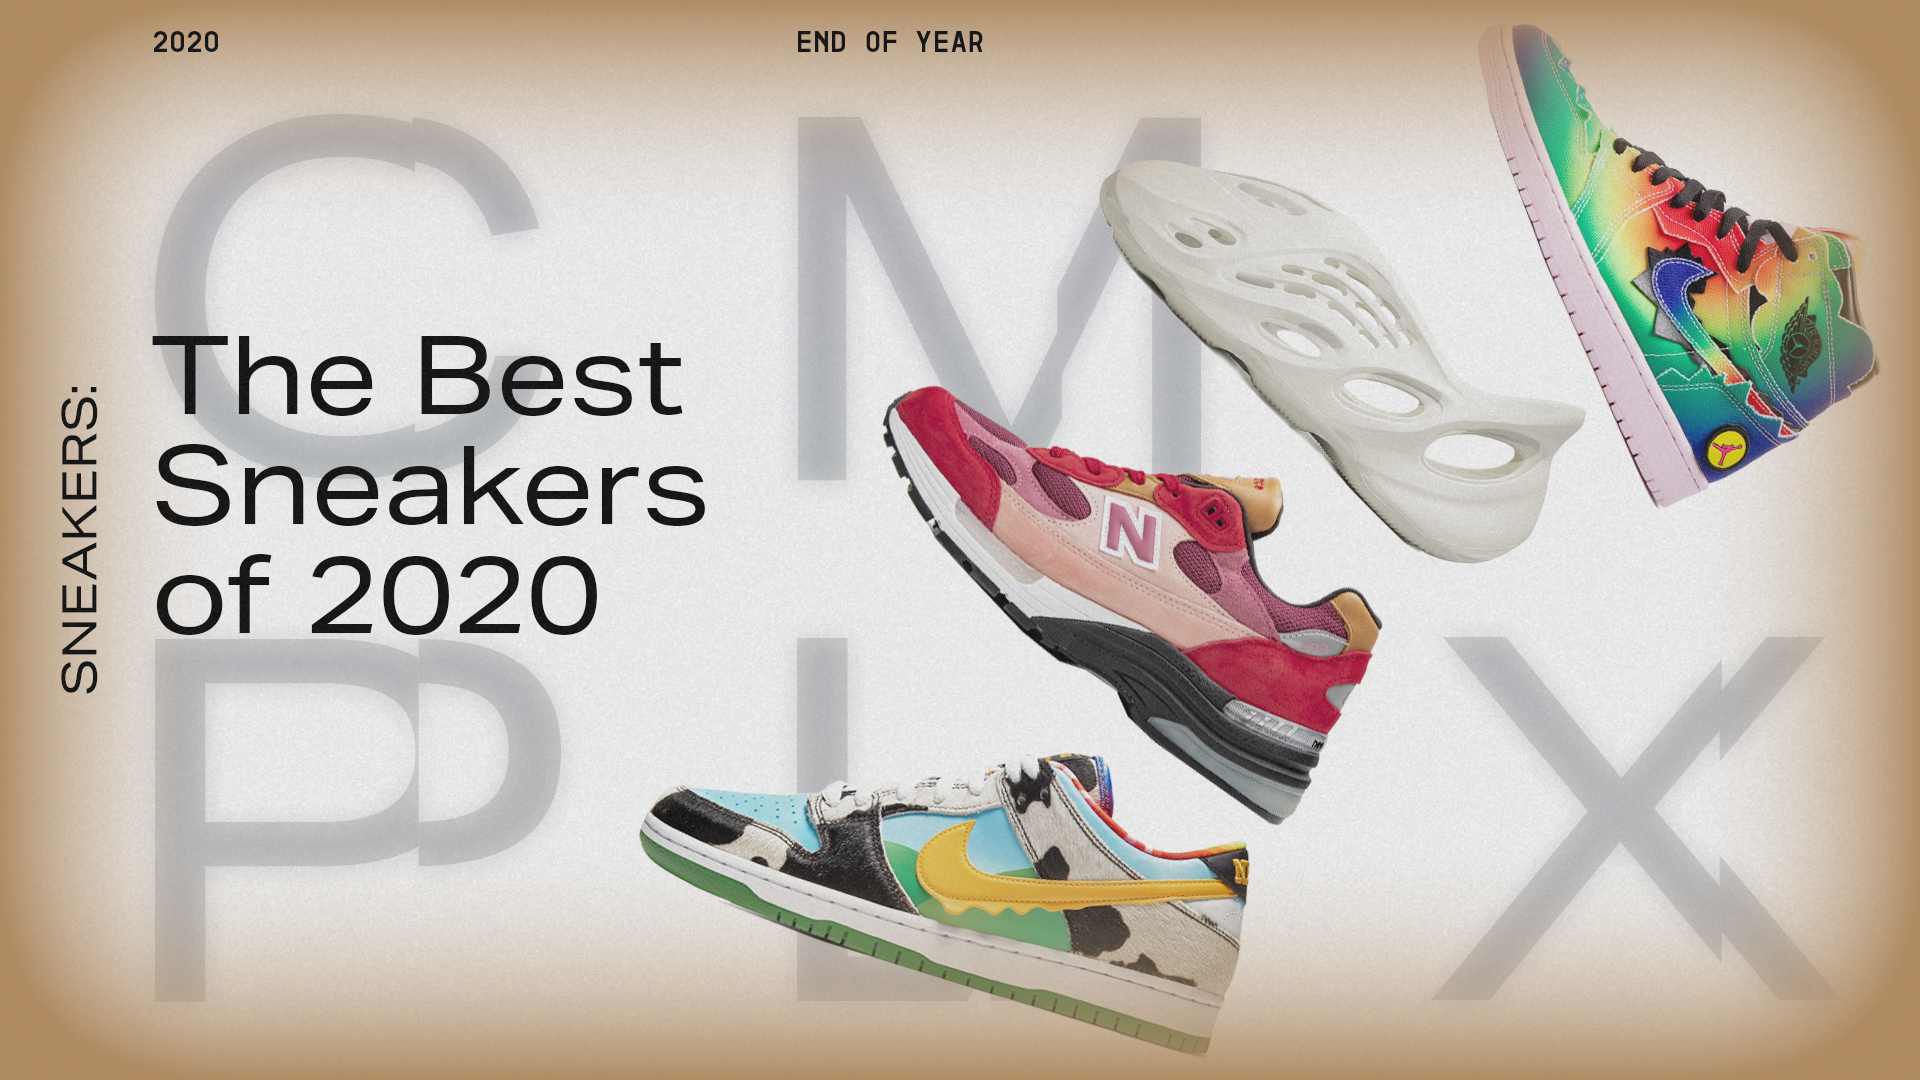 Sneakers Wave Runner KS100 - Multi Colour #Sneakers Trends 2020 | Mens  shoes casual sneakers, Trainers fashion, Sneakers men fashion